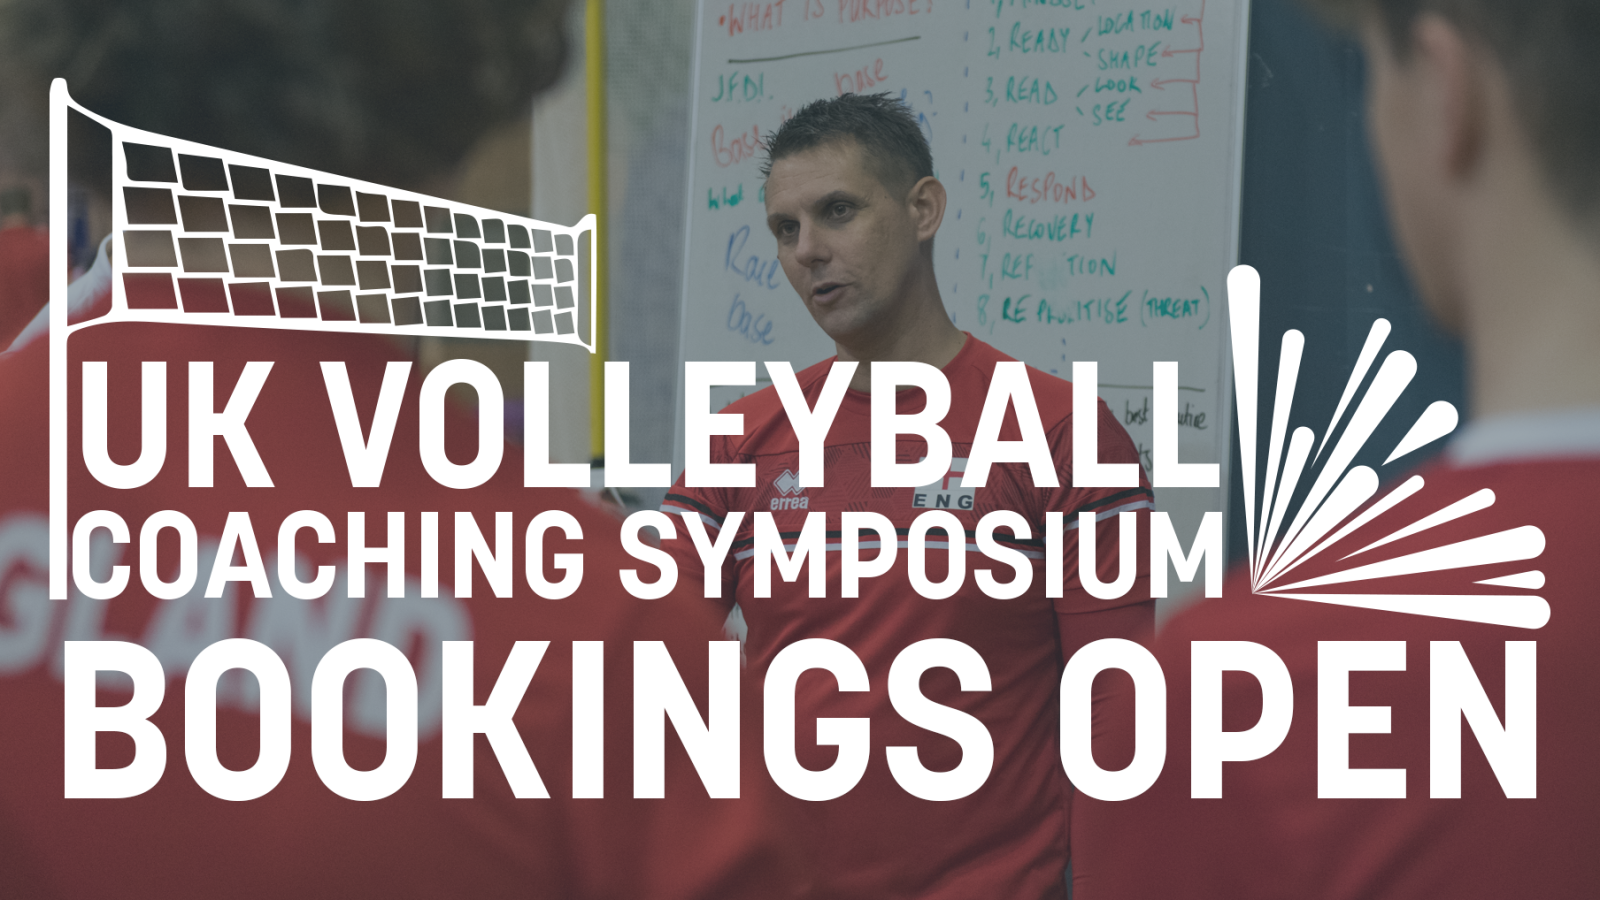 Bookings for UK Volleyball Coaching Symposium open